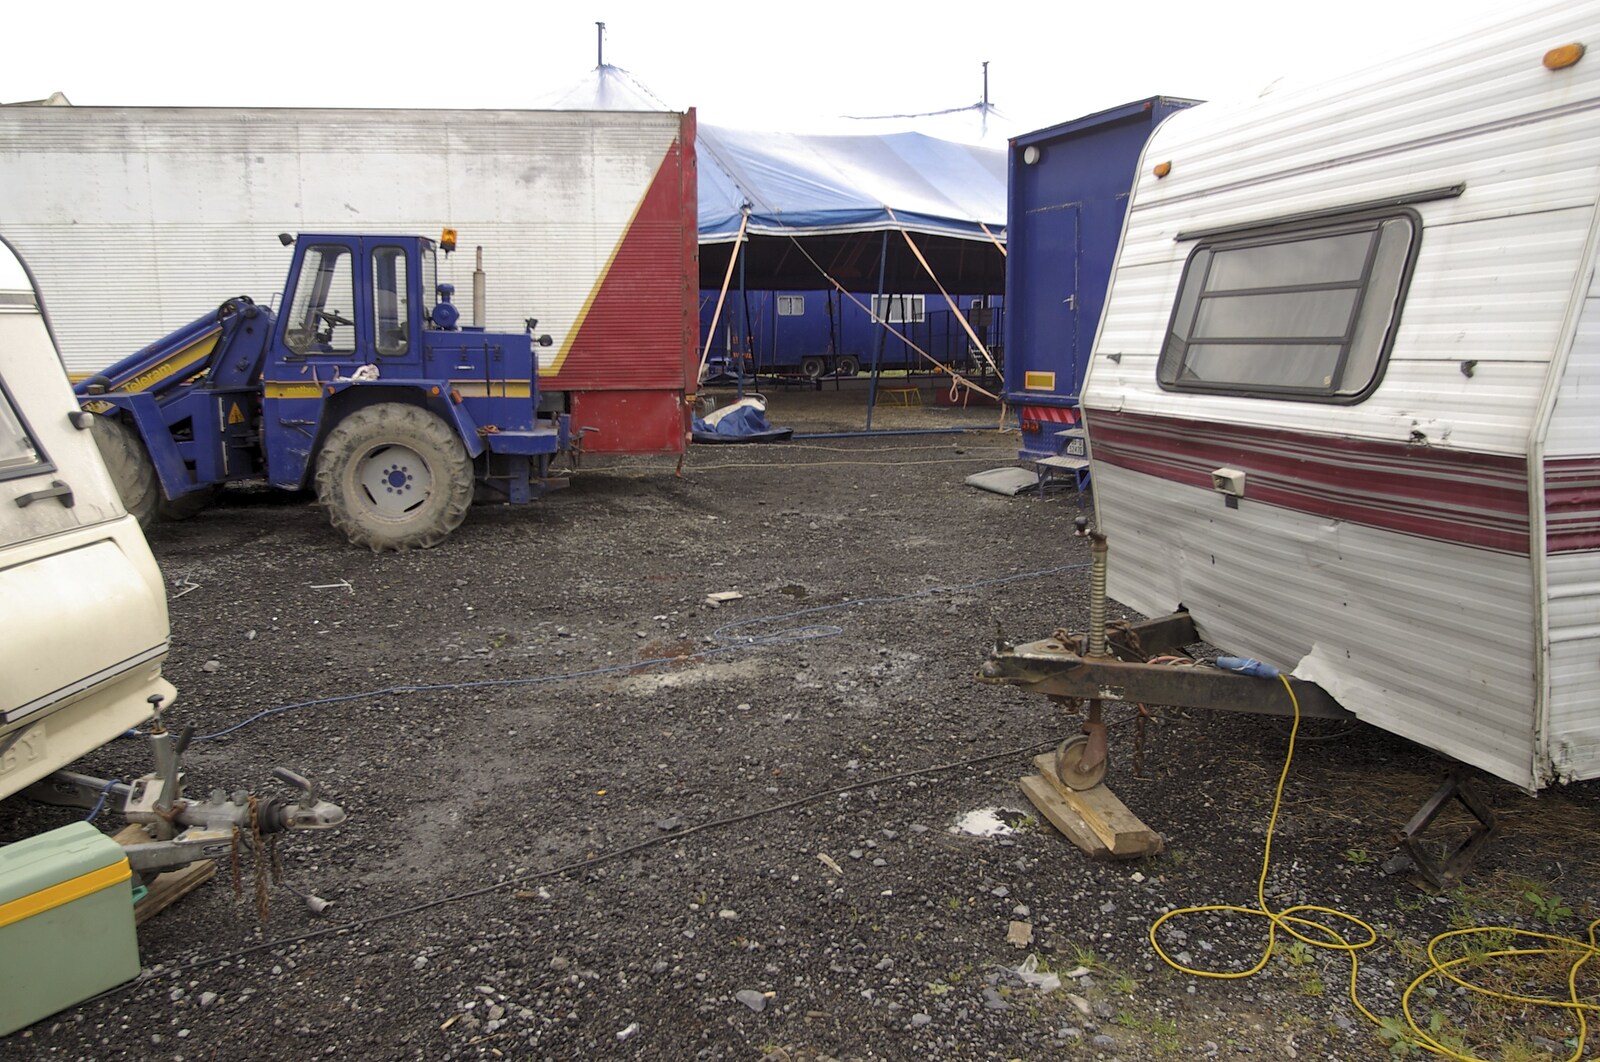 A knackered caravan at the Booterstown Fair from Blackrock and Dublin, Ireland - 24th September 2007